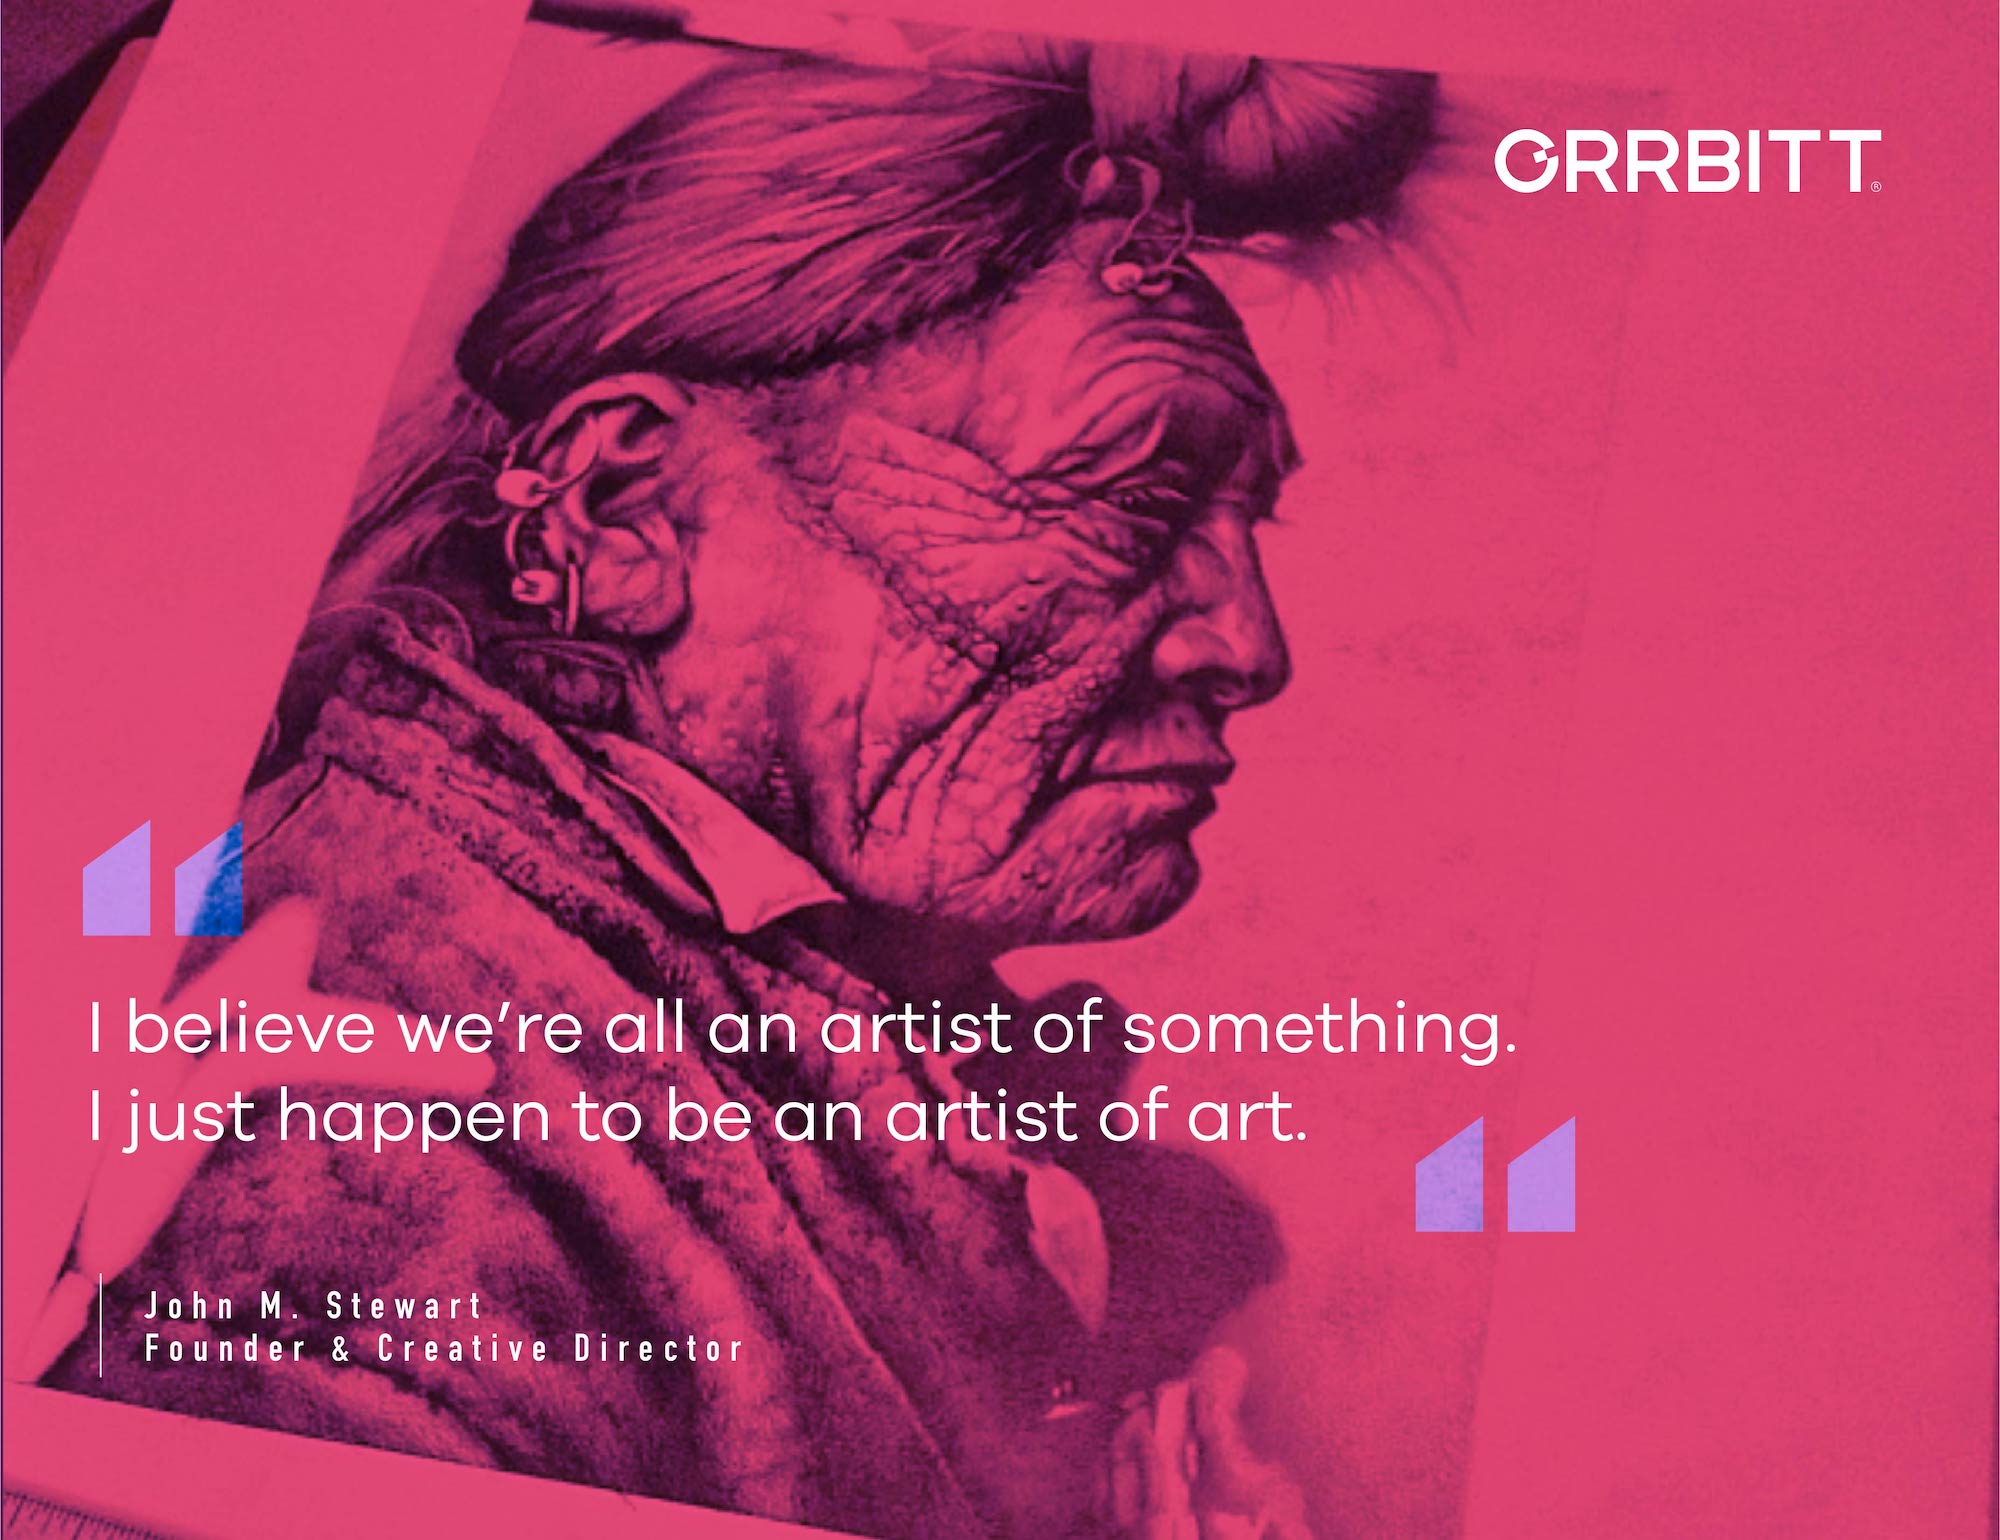 "I believe we're all an artist of something. I just happen to be an artist of art." Quote from John M. Stewart, founder & Creative director at Orrbitt. Over drawing of profile of an indigenous man with earring and feather on his hair.